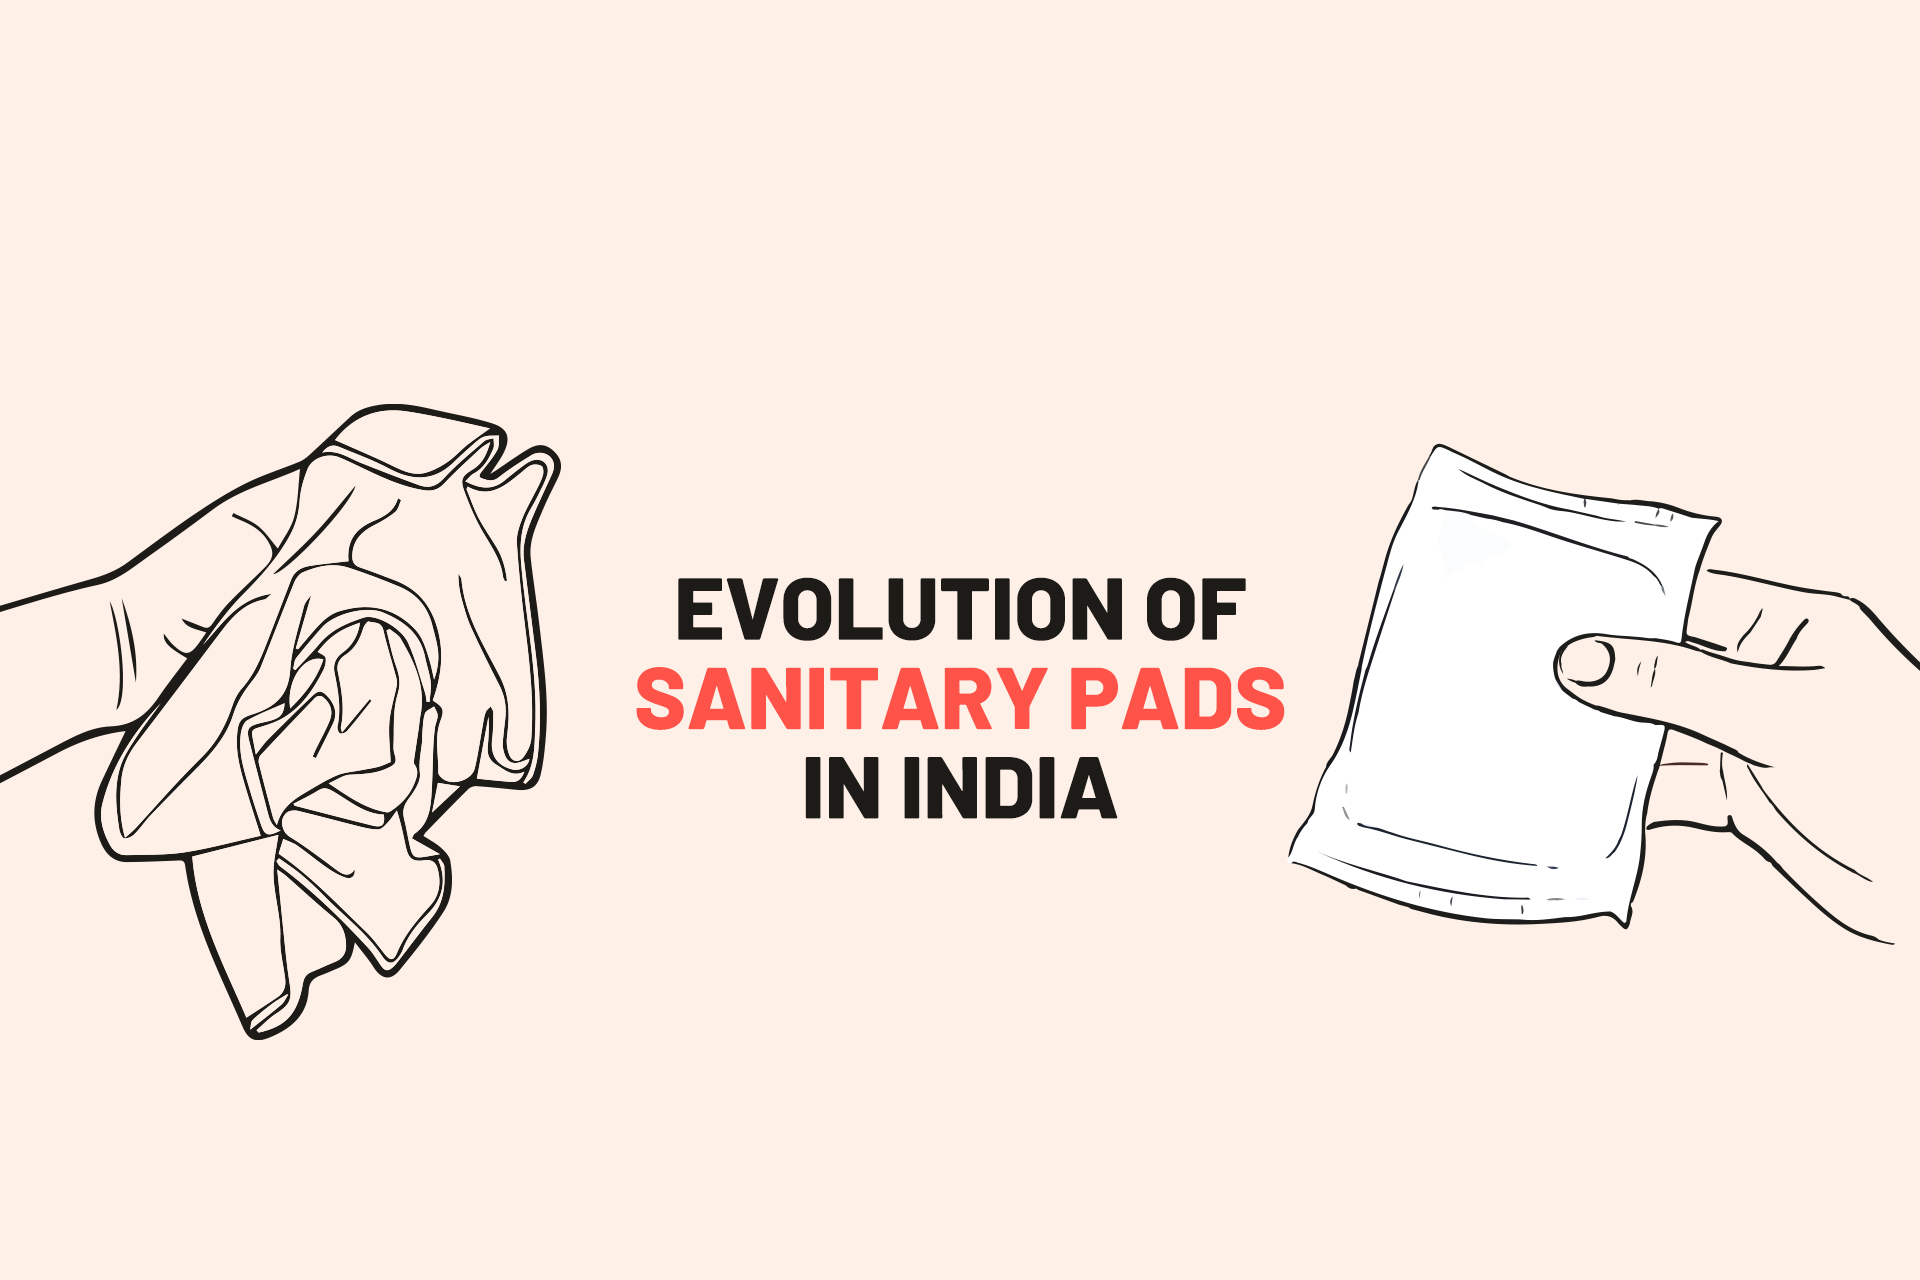 Evolution of Sanitary Pads in India